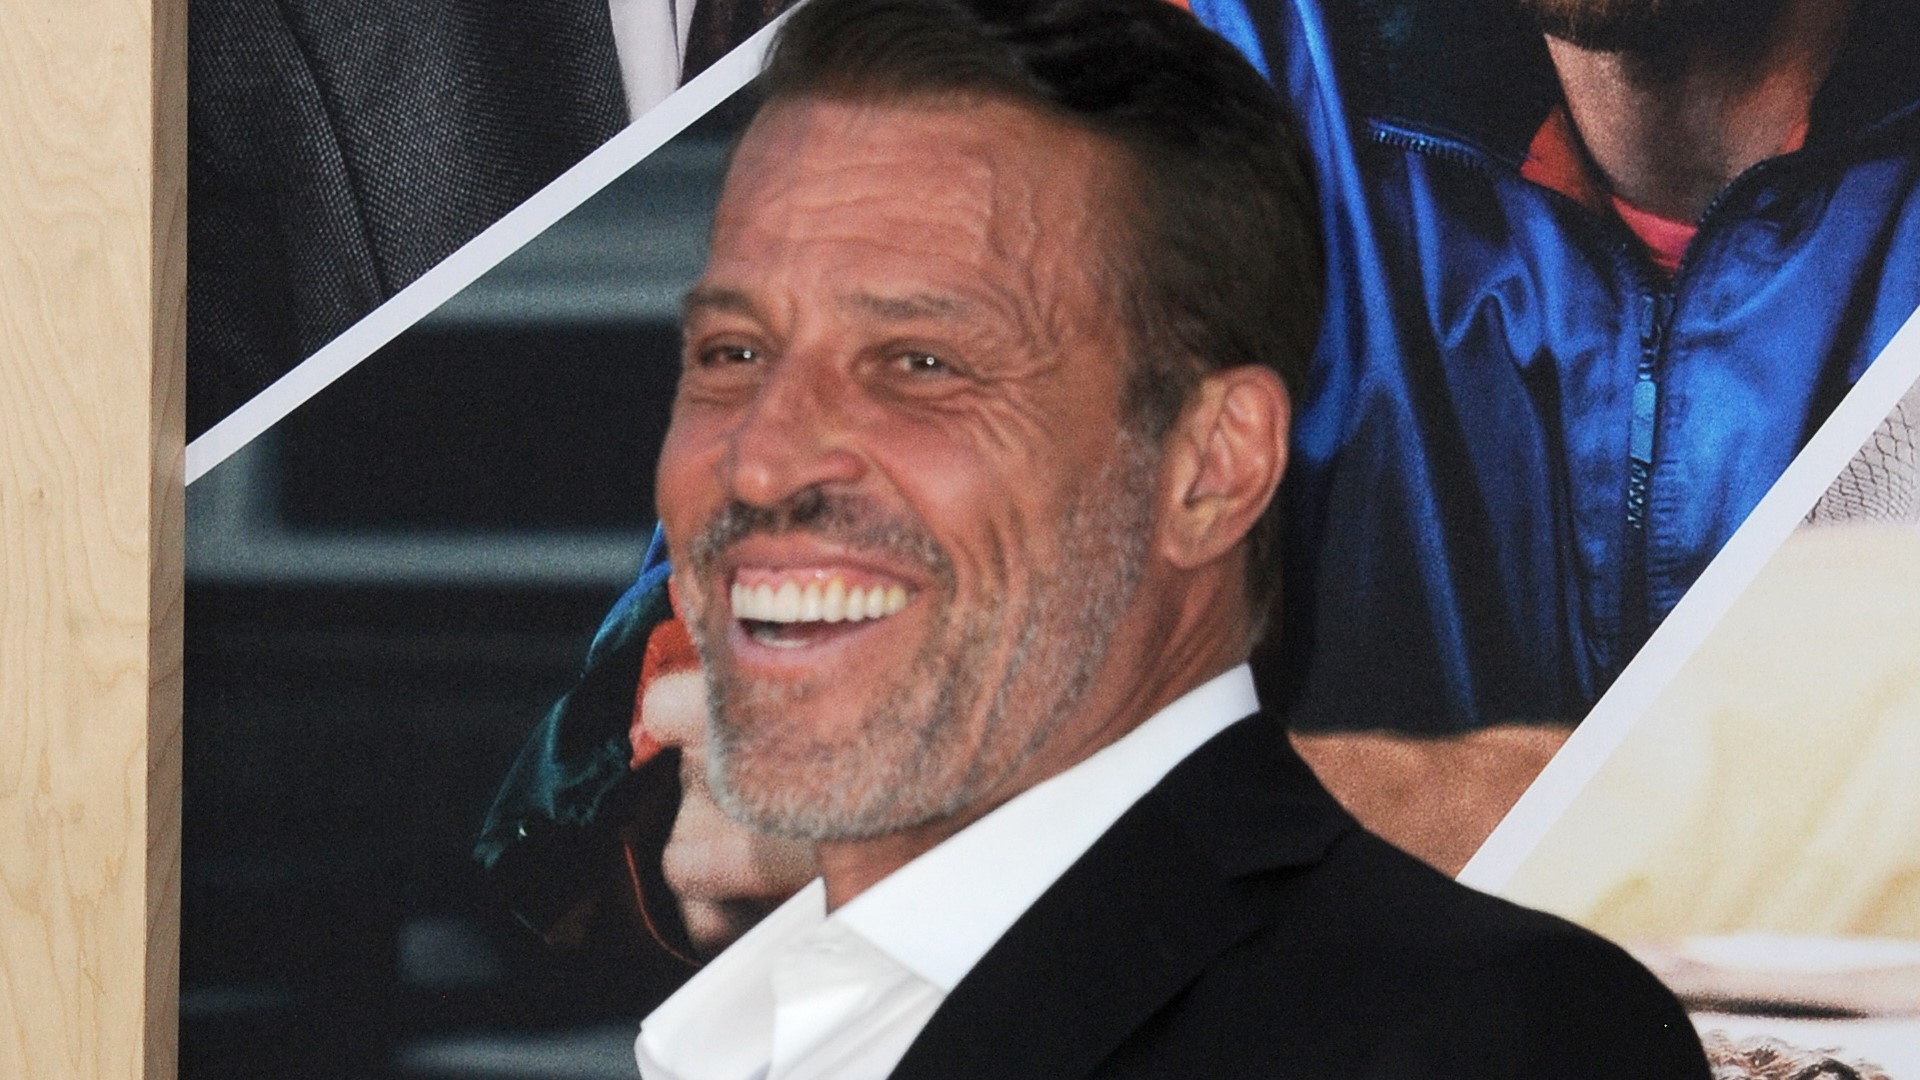 tony robbins: 5 retirement planning tips he swears by